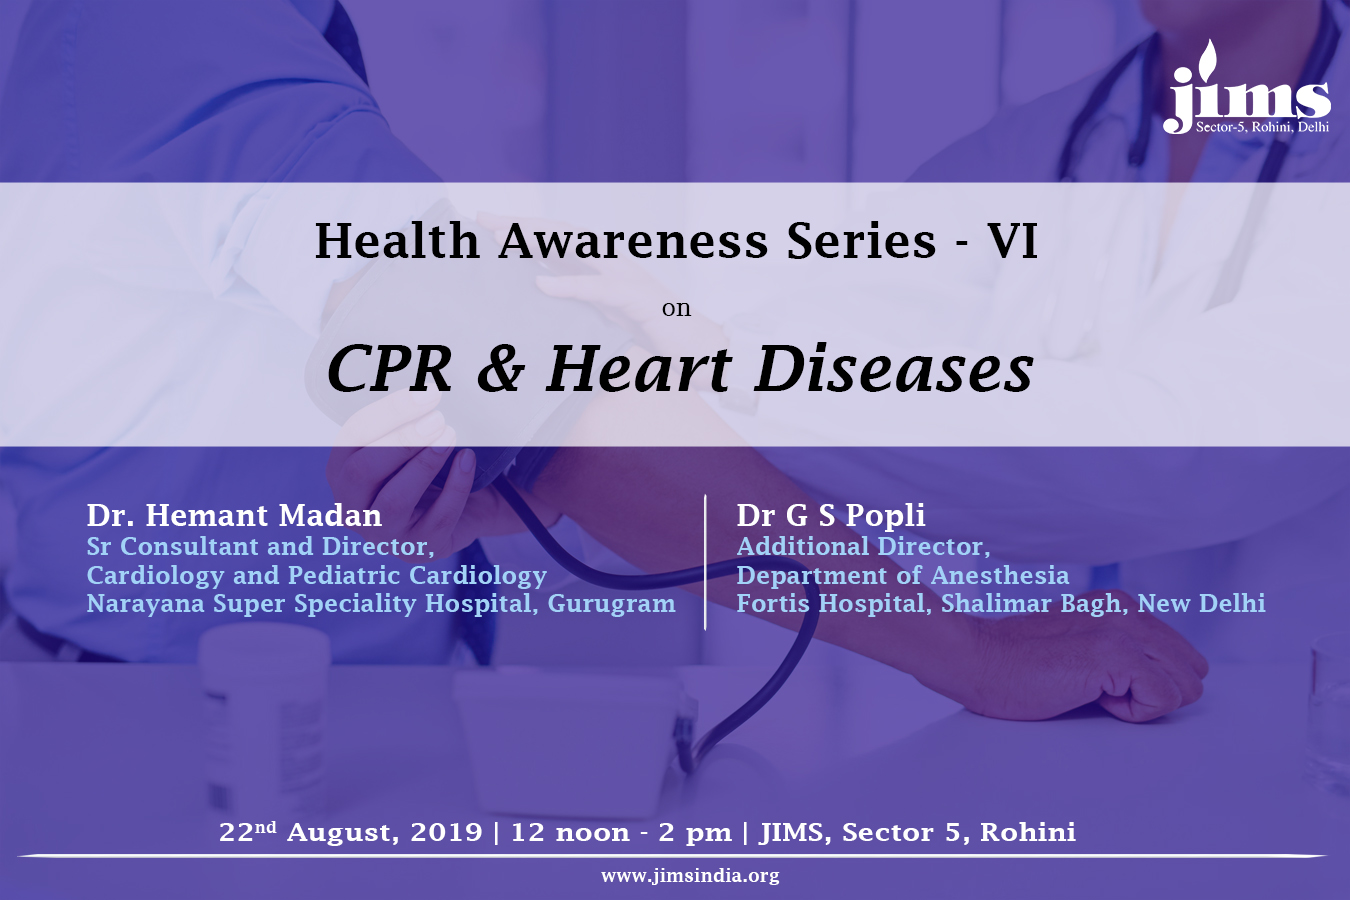 JIMS Rohini IP department is organizing Health Awareness Series version VI on 22nd August 2019